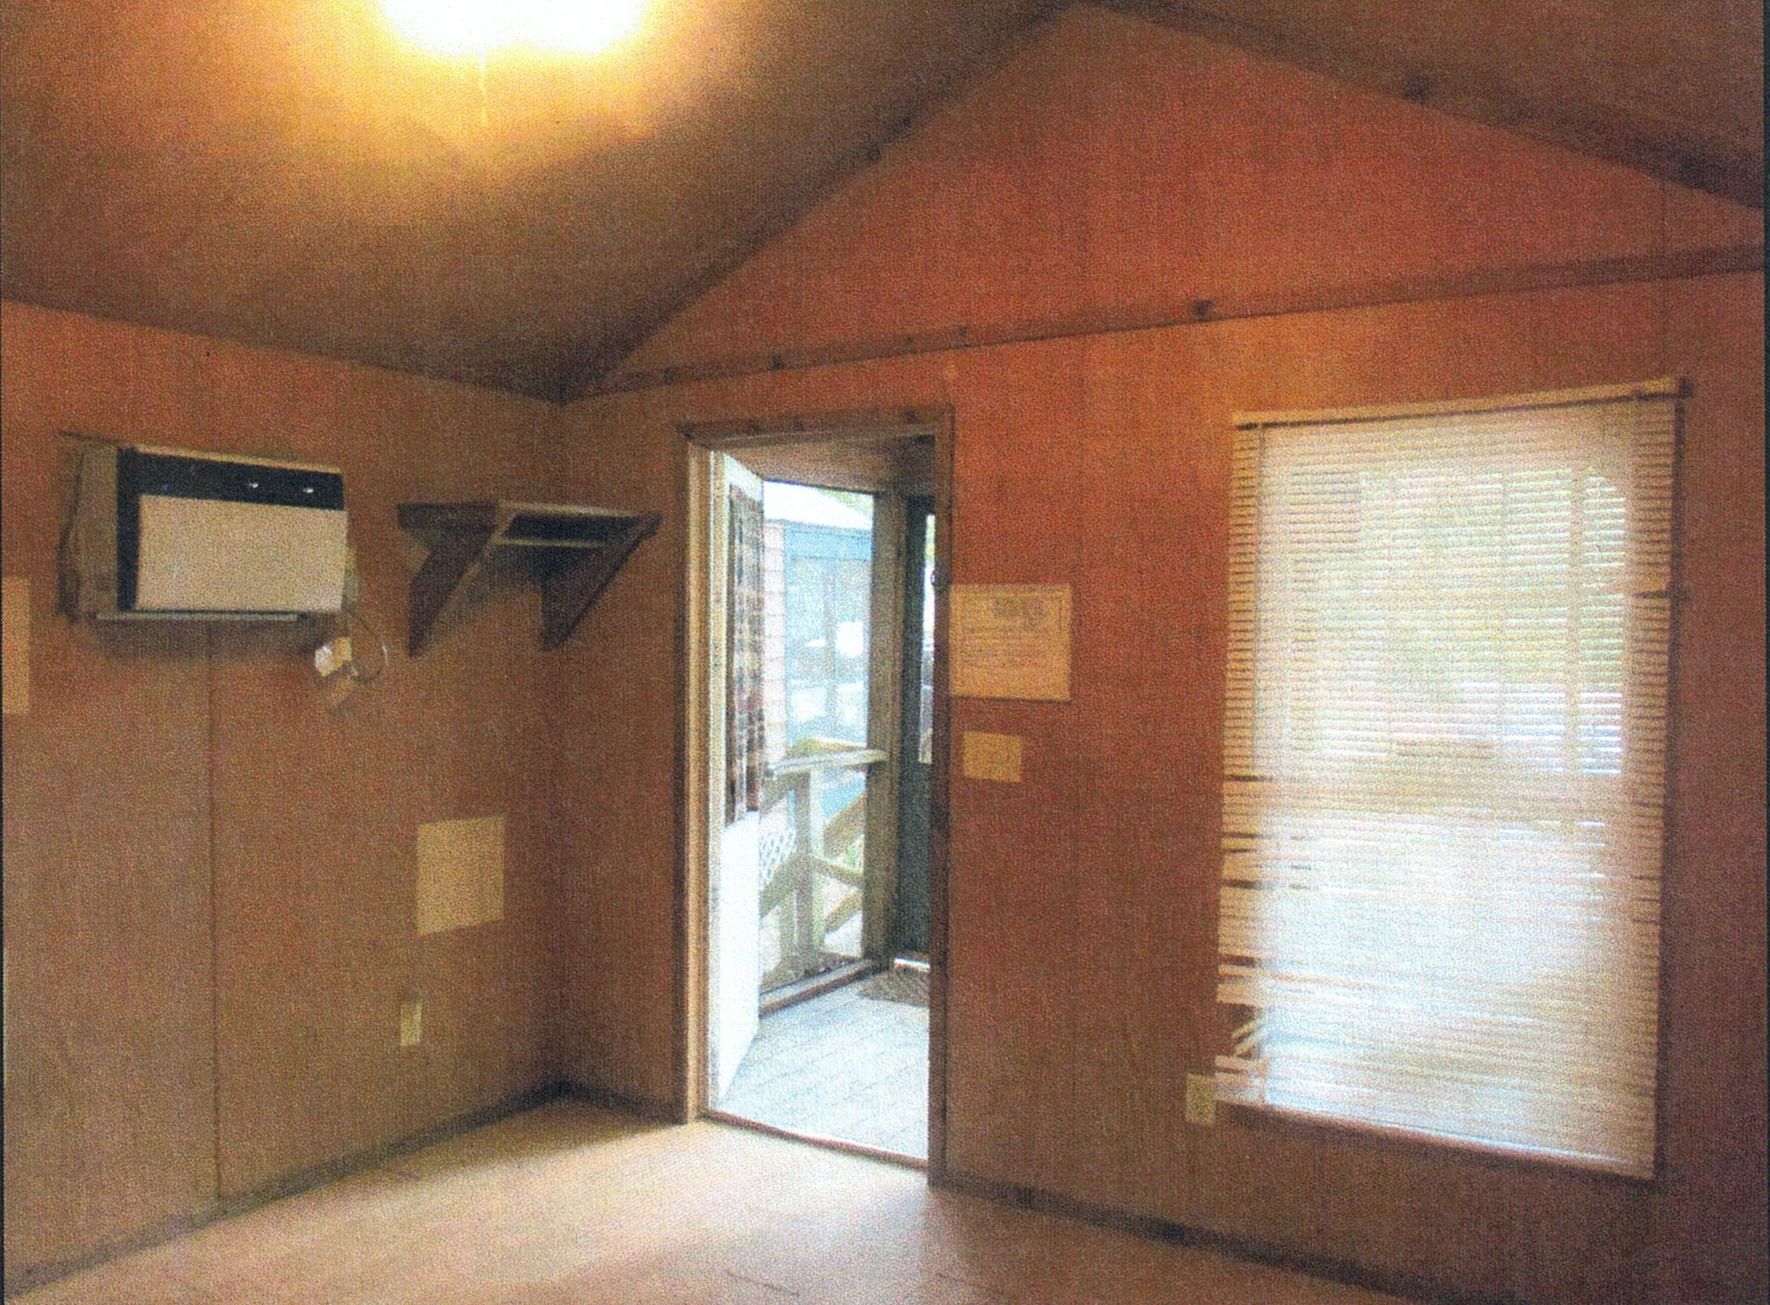 Inside of a cozy cabin rental at Hanna Park showing air conditioner, front door, and window